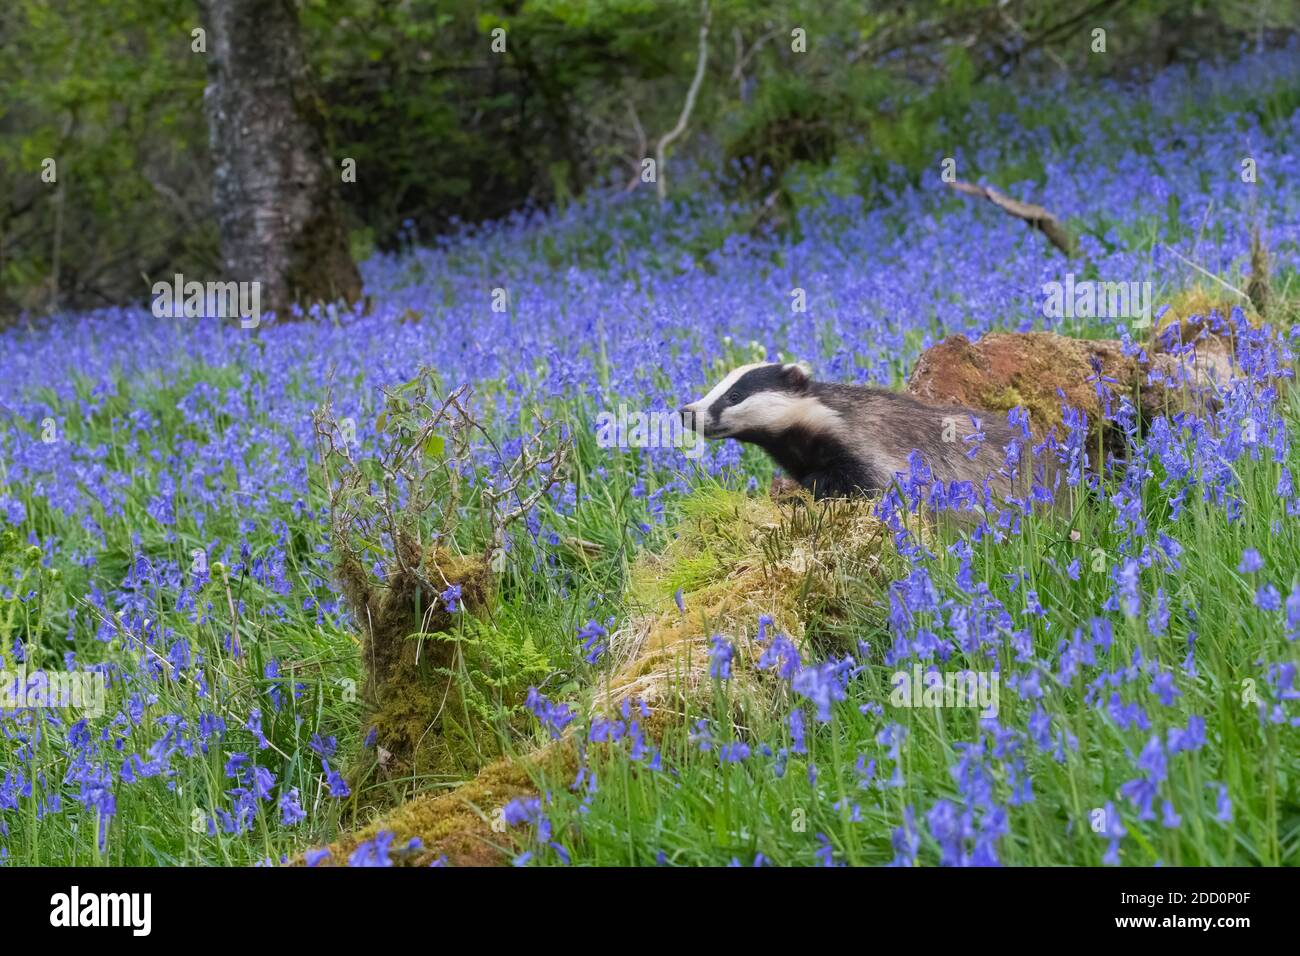 European Badger, Meles meles, in bluebell woodland, Dumfries and Galloway, Scotland Stock Photo